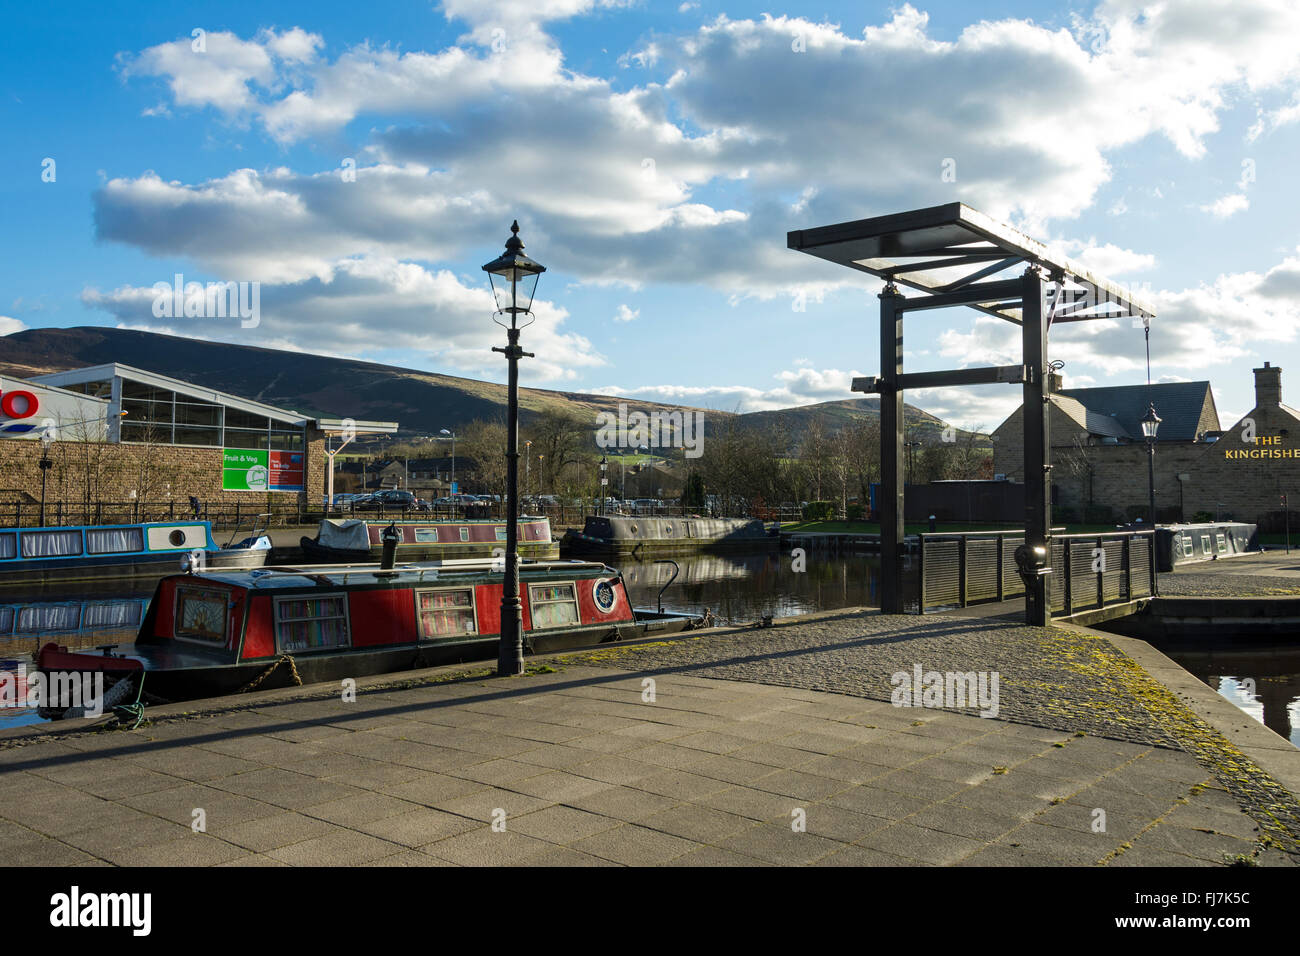 Frenches Marina on the Huddersfield Narrow canal at Greenfield, Saddleworth, Greater Manchester, UK. Stock Photo